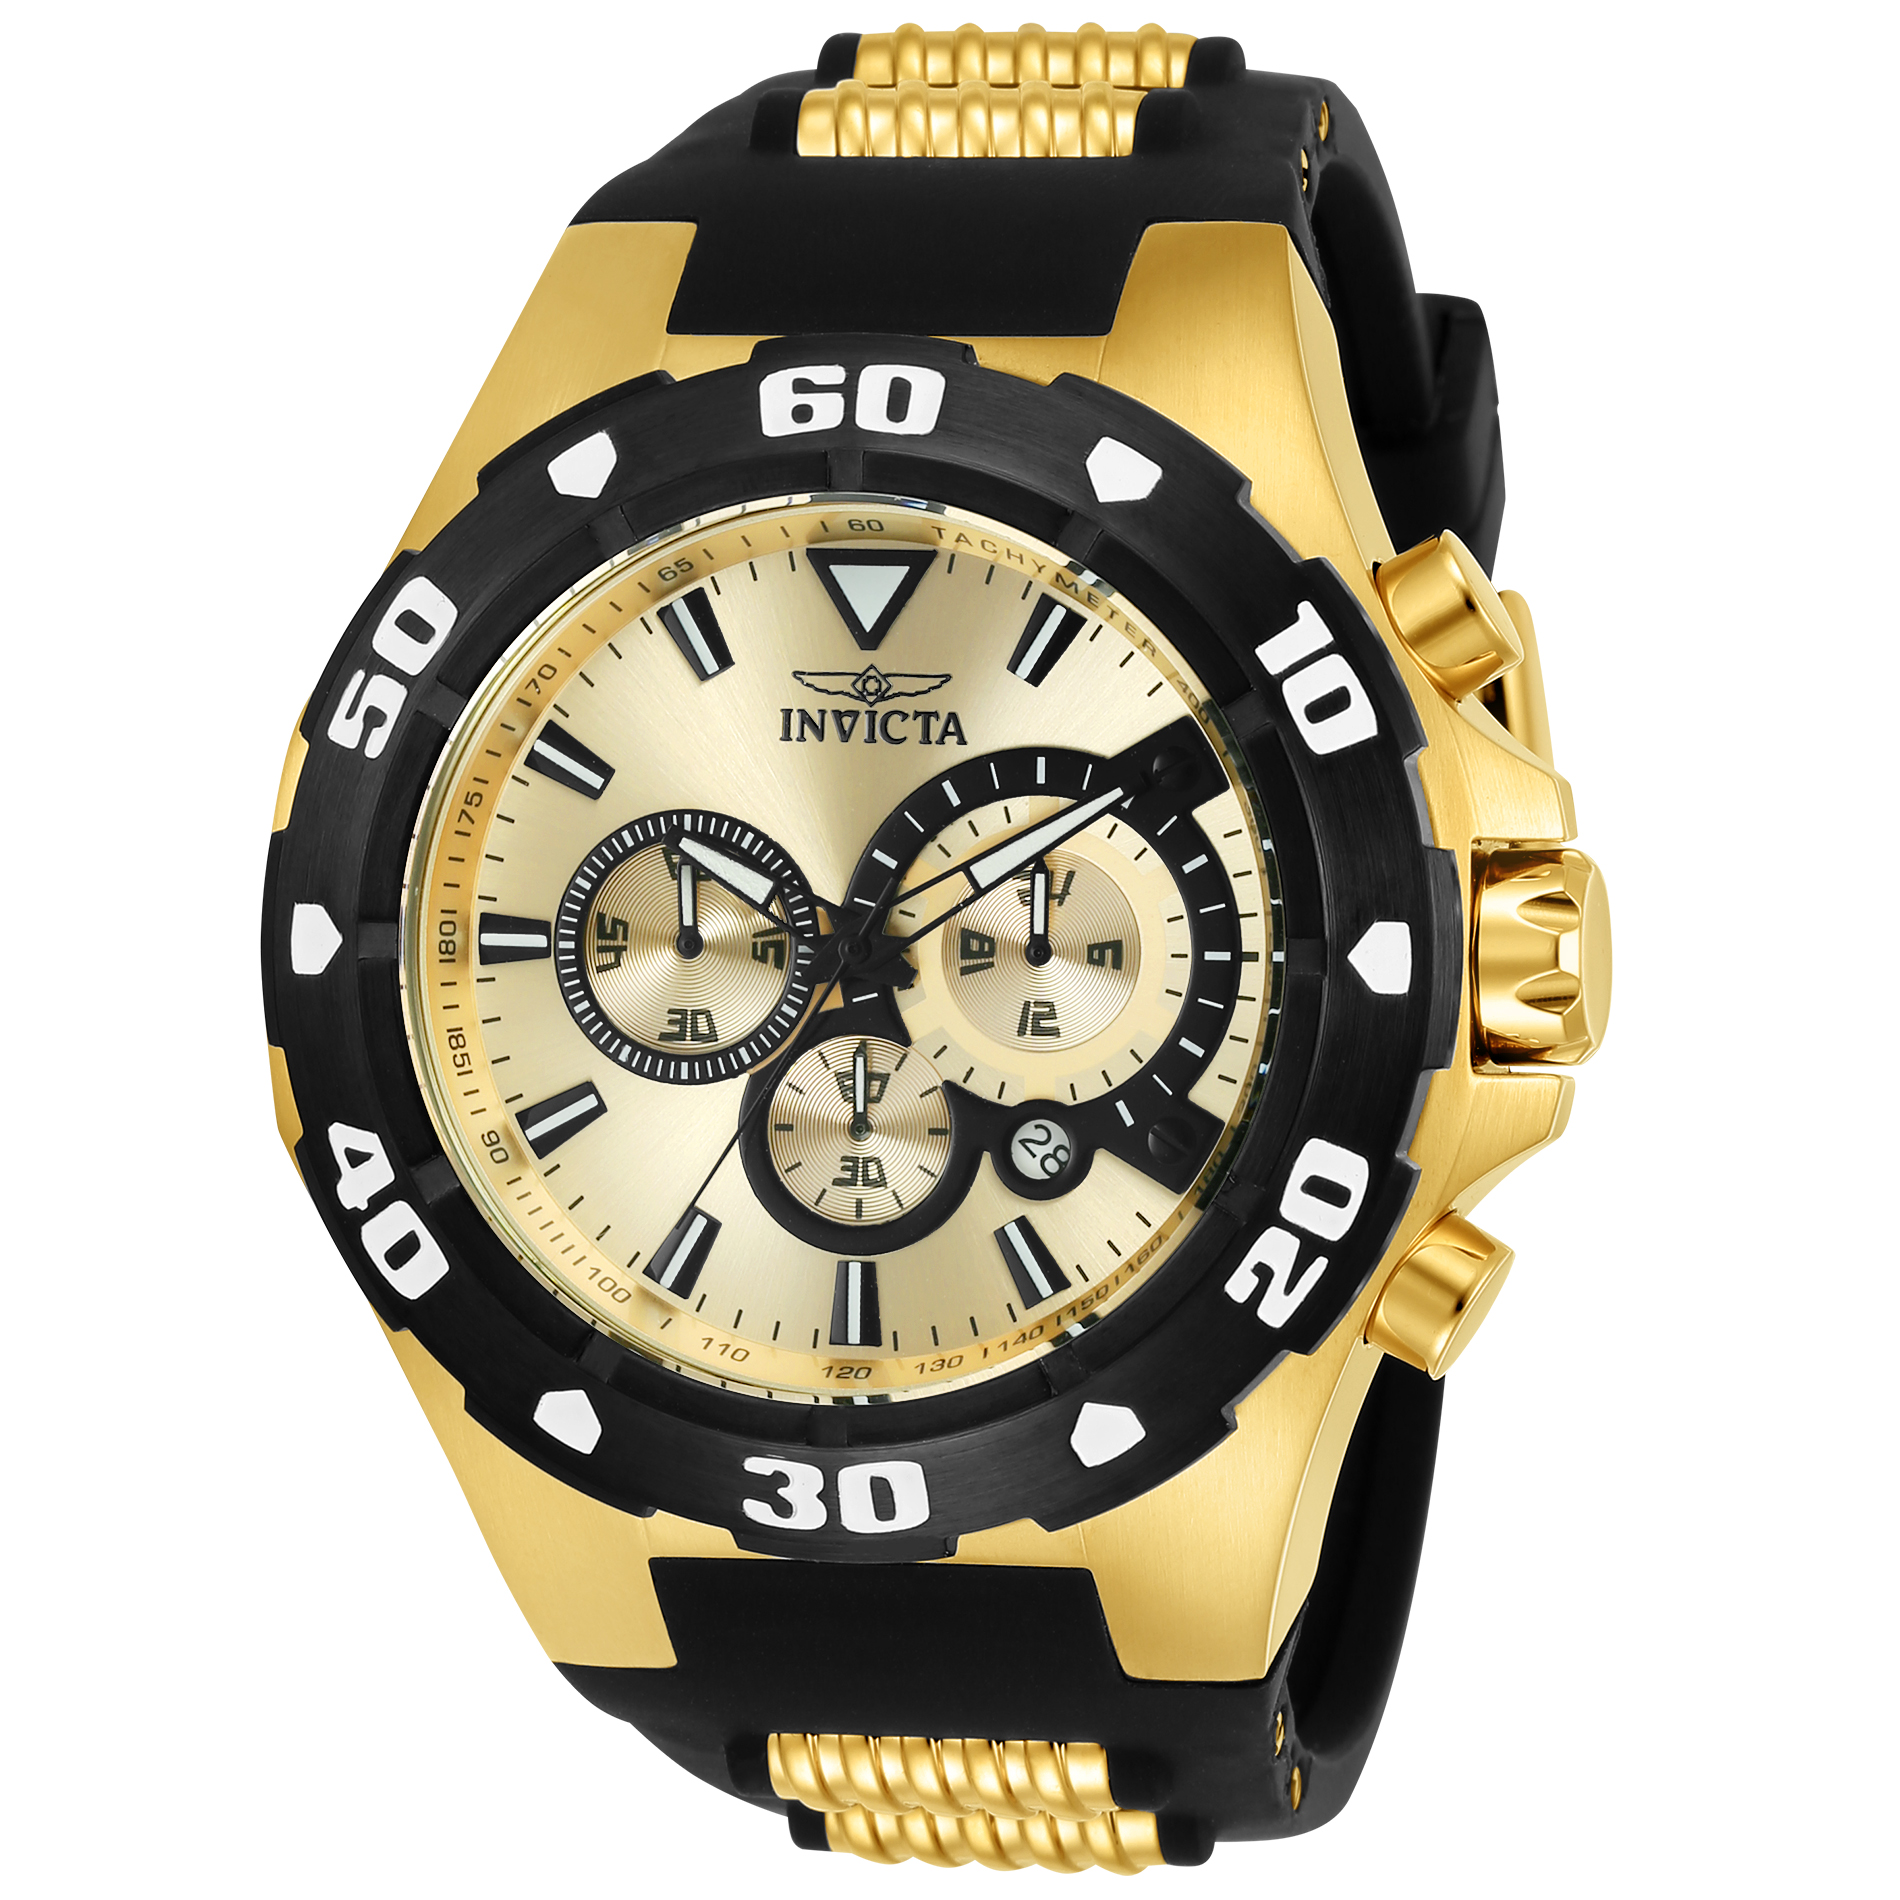 Invicta Men's Pro Driver 52mm Stainless Steel Watch